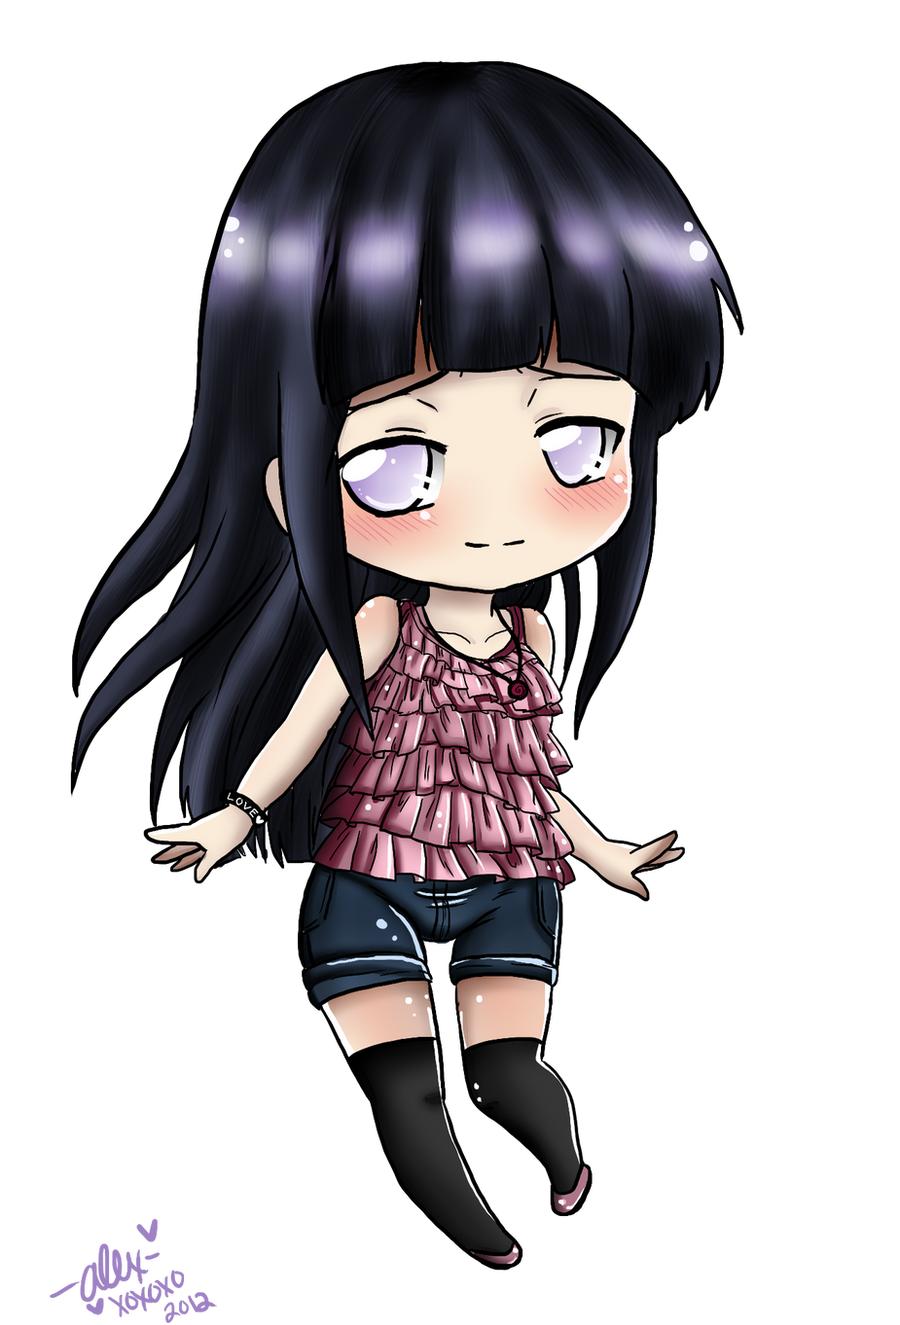 Hinata Chibi-cute outfit time! by shock777 on DeviantArt